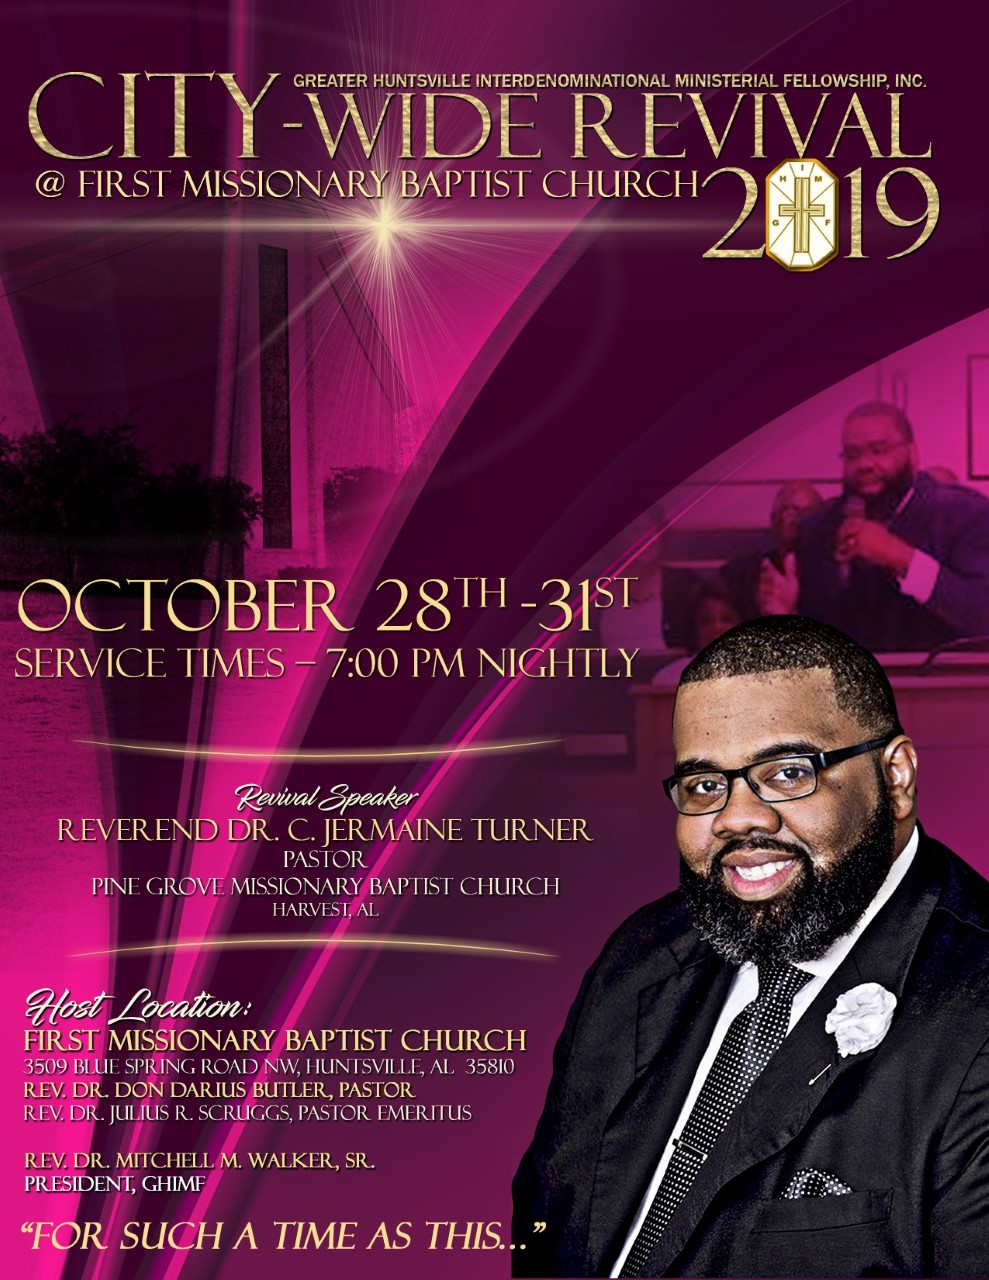 The Greater Huntsville Interdenominational Ministerial Fellowship hosts Citywide Revival